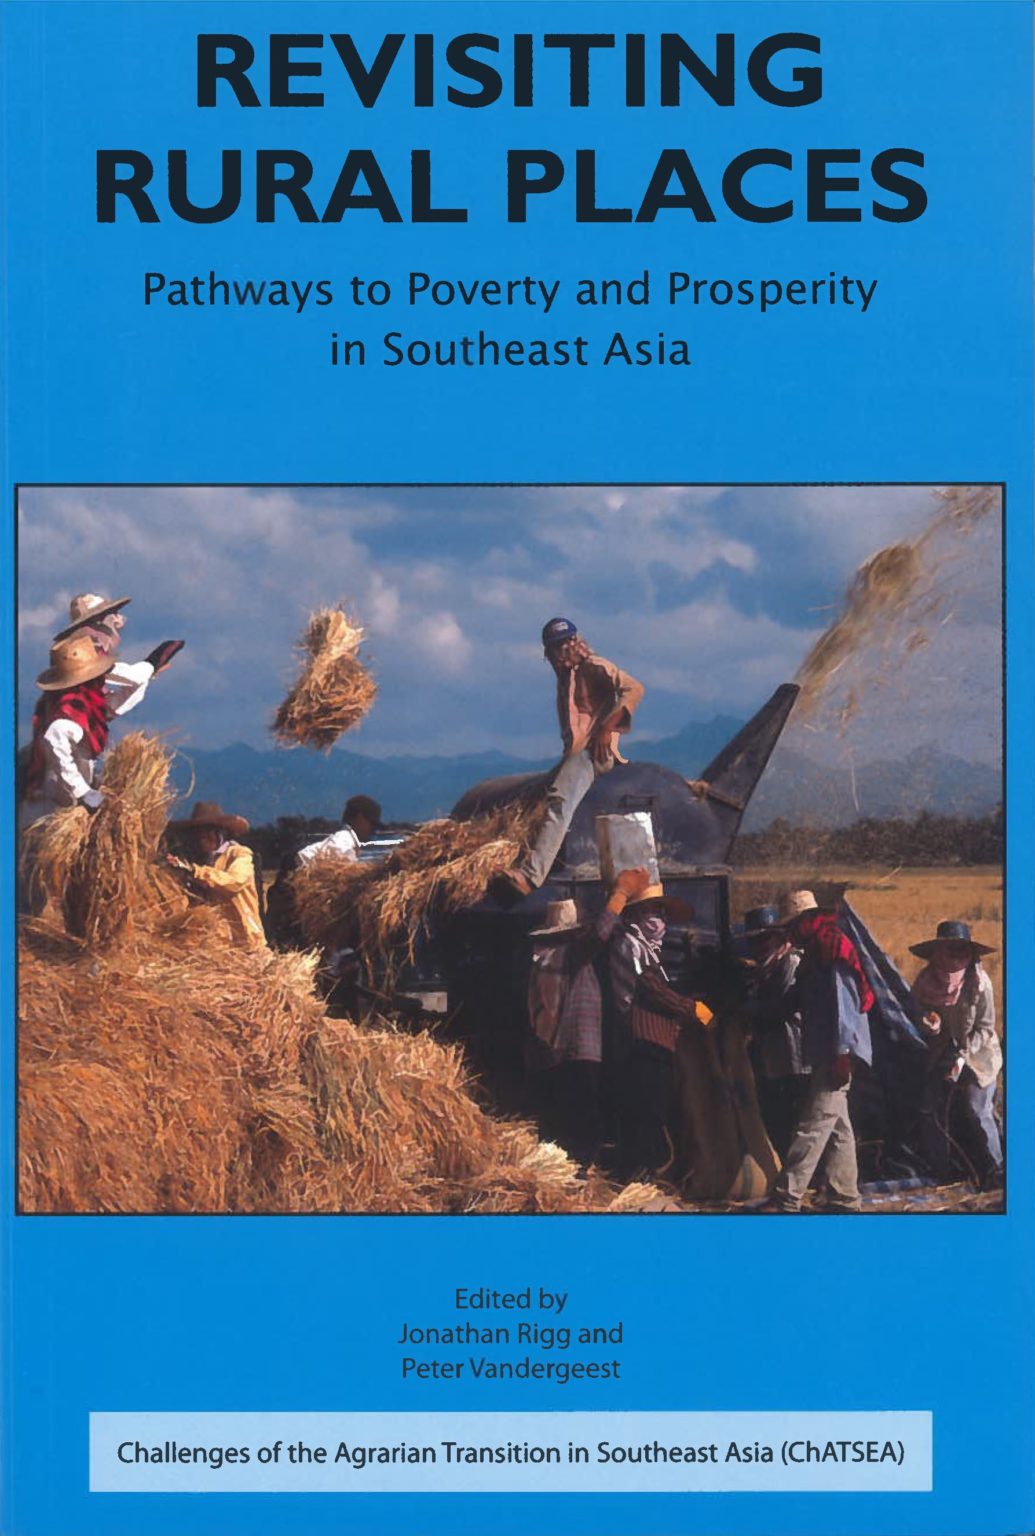 Revisiting Rural Places: Pathways to Poverty and Prosperity in Southease Asia